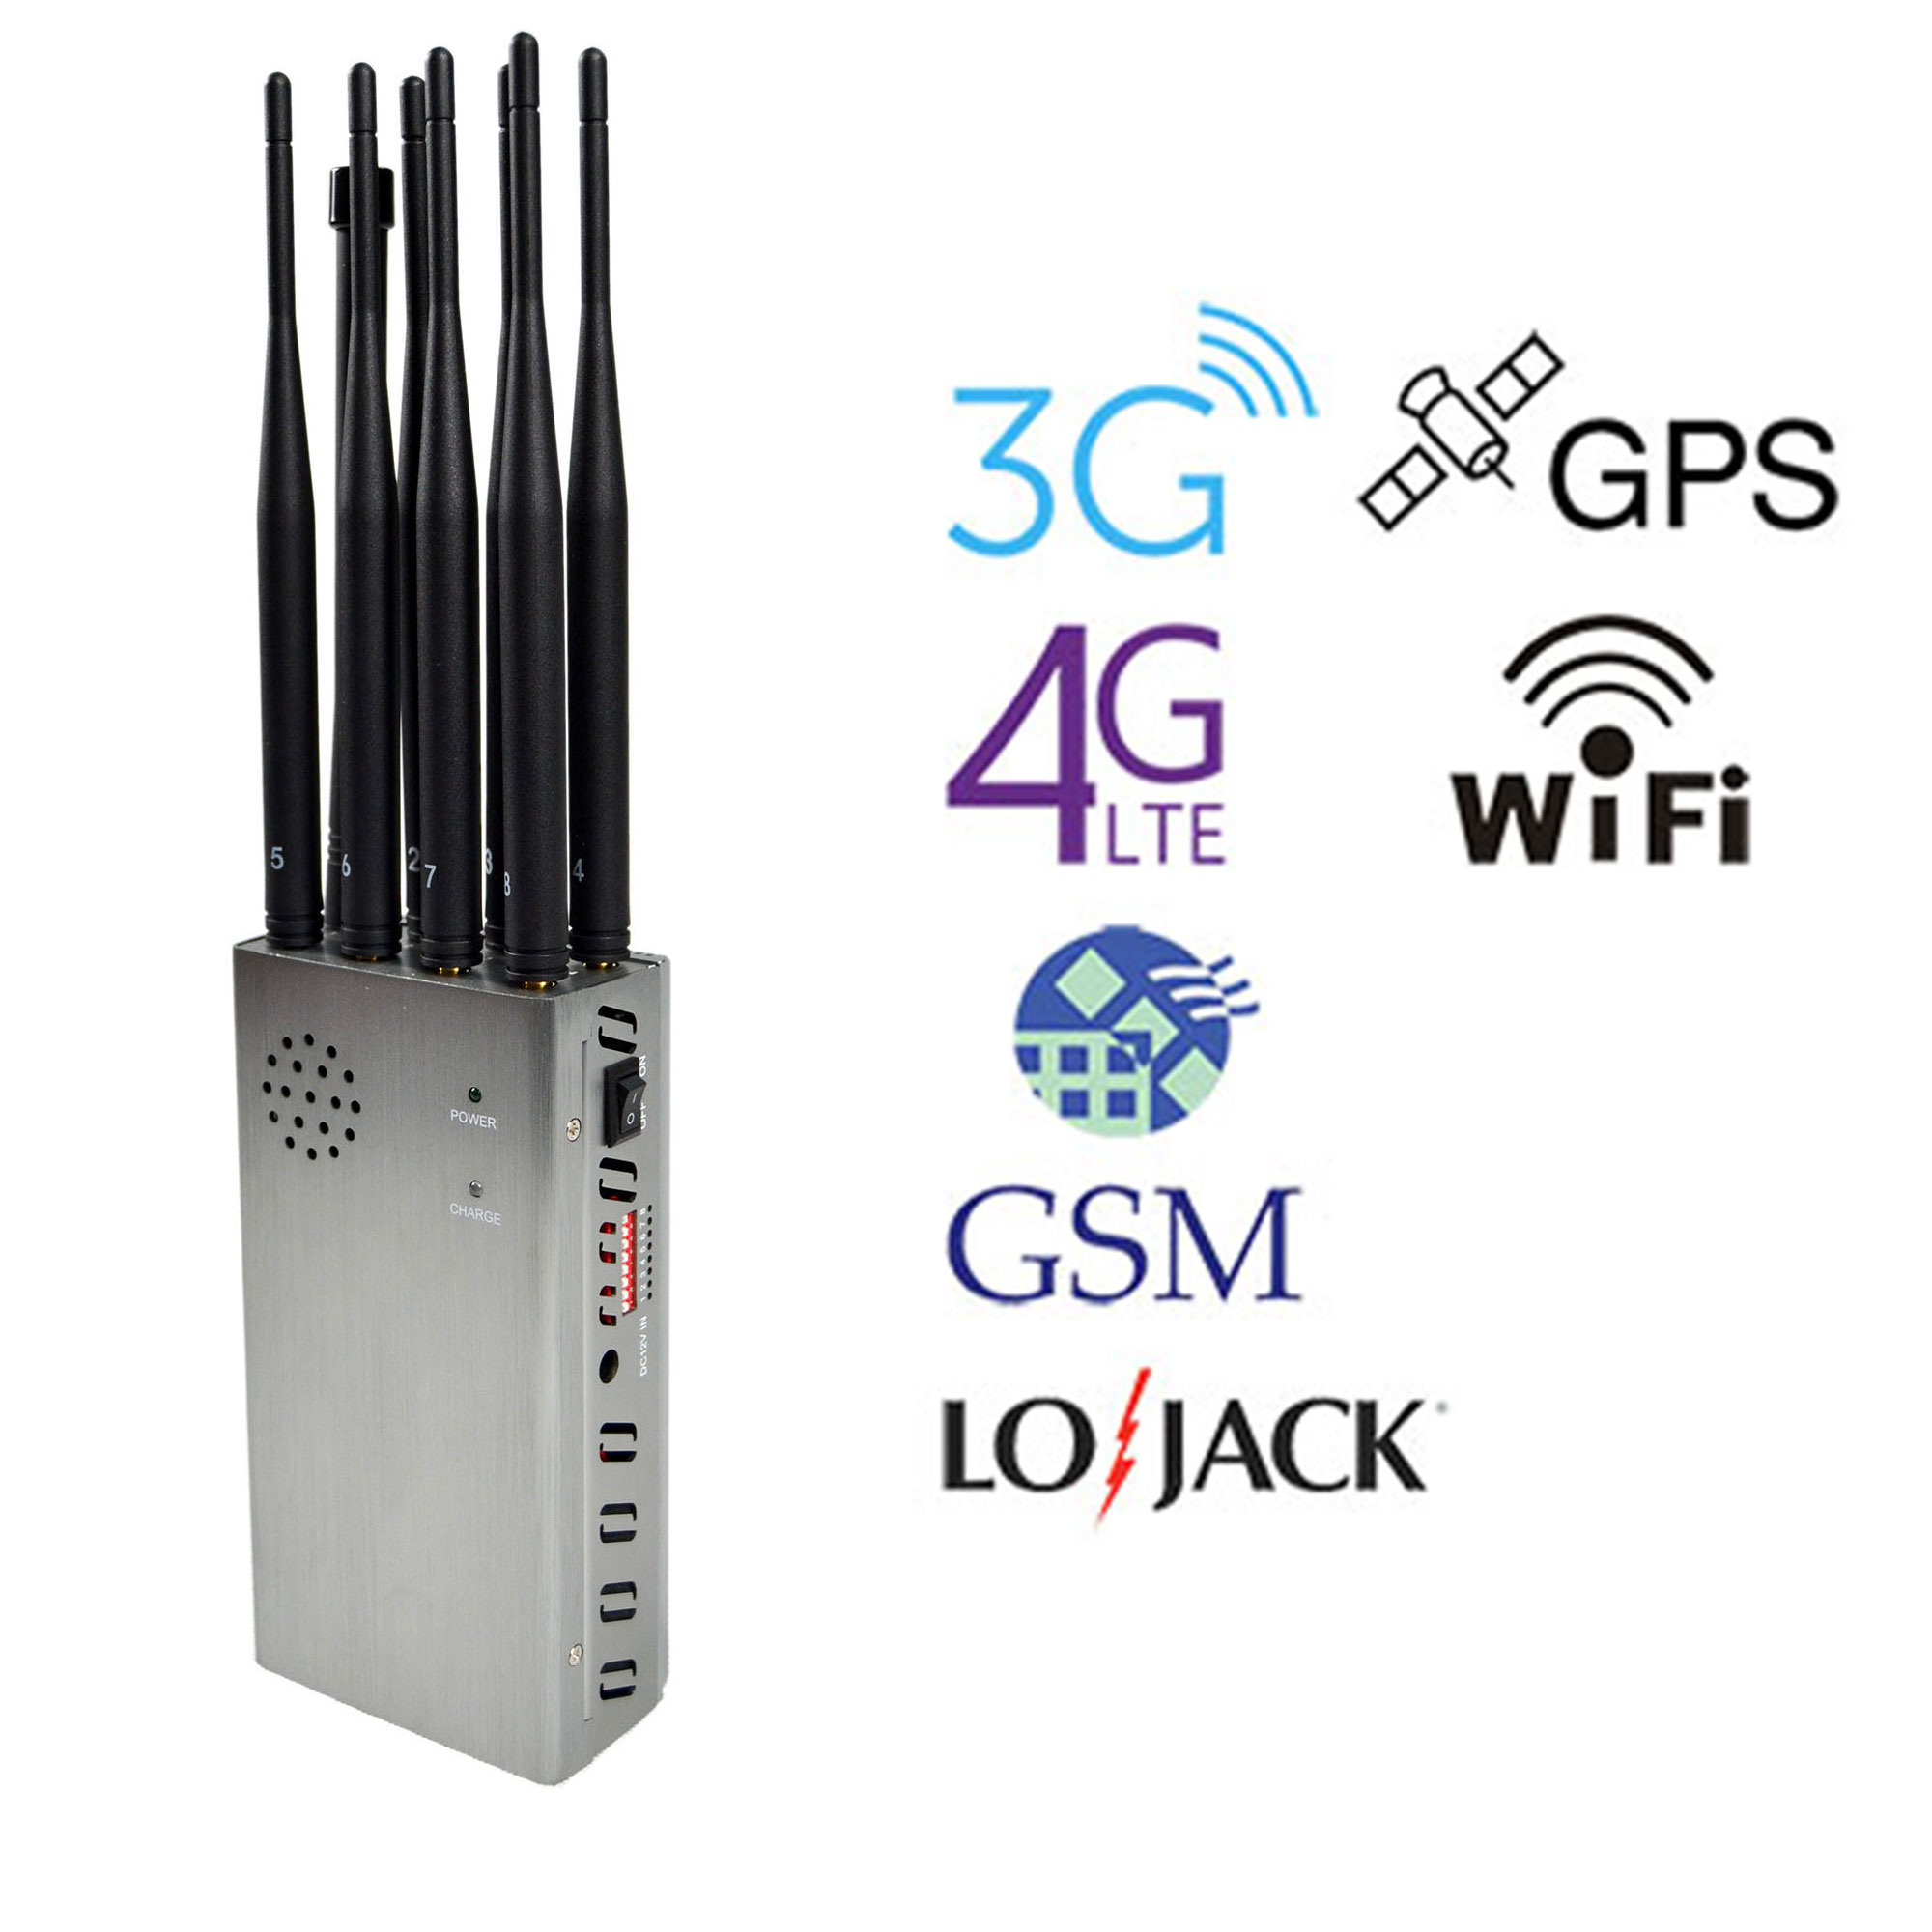 jammer network extra jobs | Portable 8 Antennas Cell Phone Jammers With 2g 3G 4G And LOJACK GPS WIFI Signals